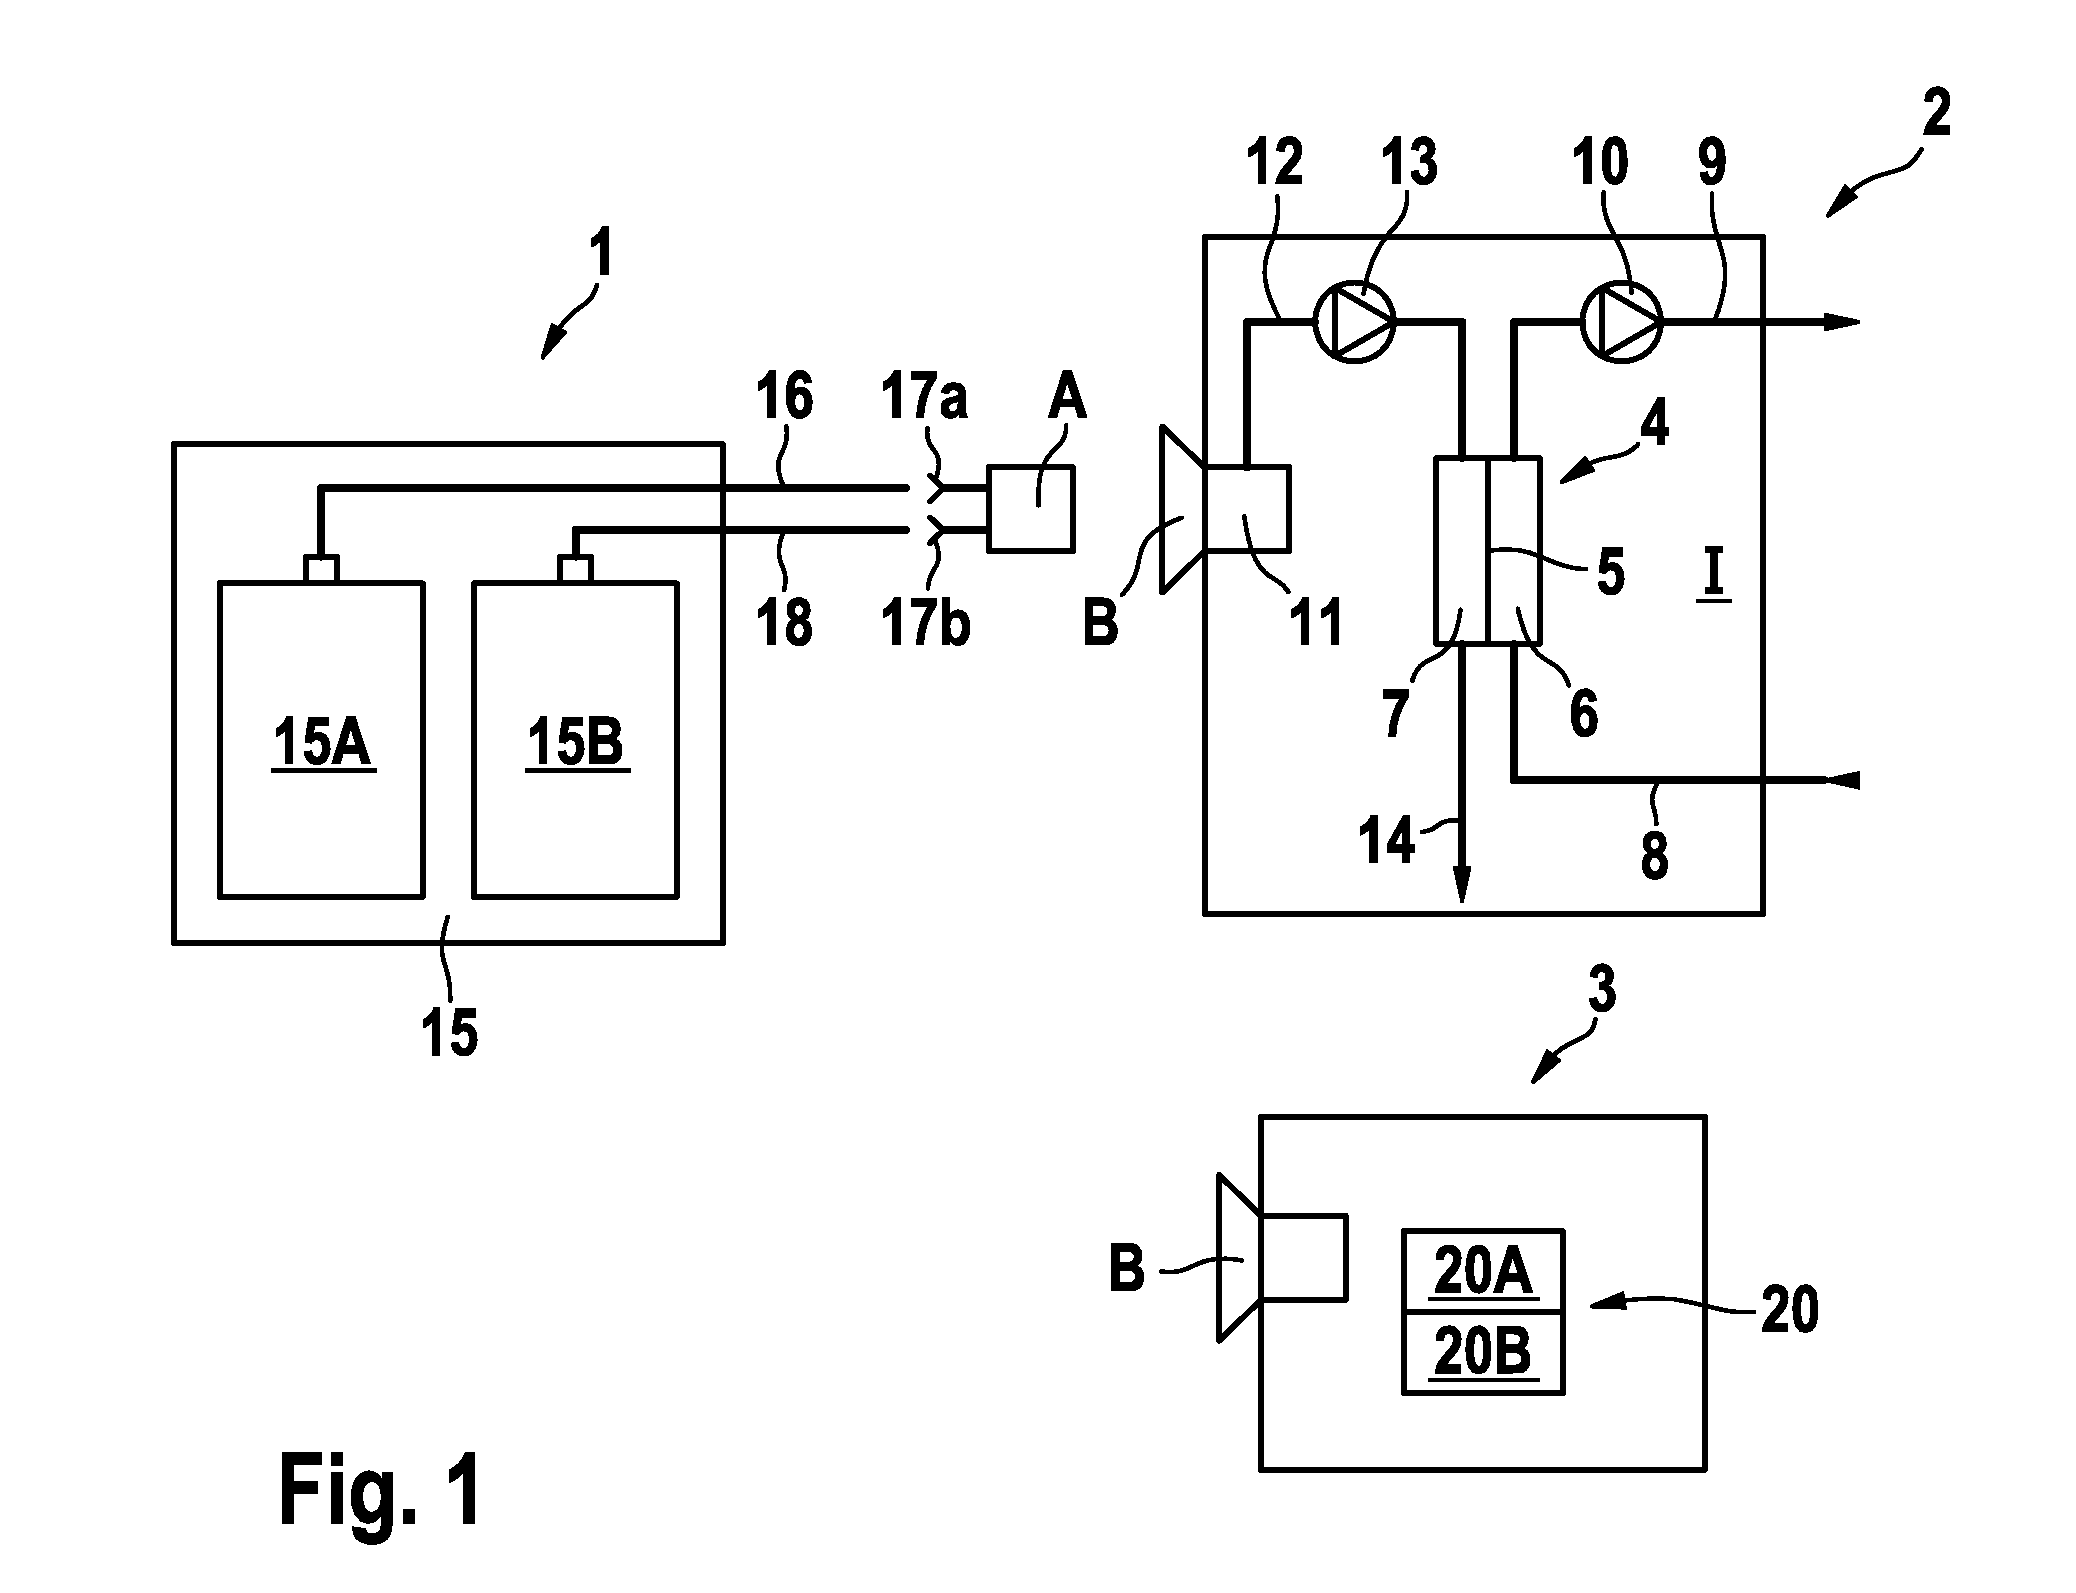 Medical apparatus with a socket unit for the connection of a device for supplying medical fluids